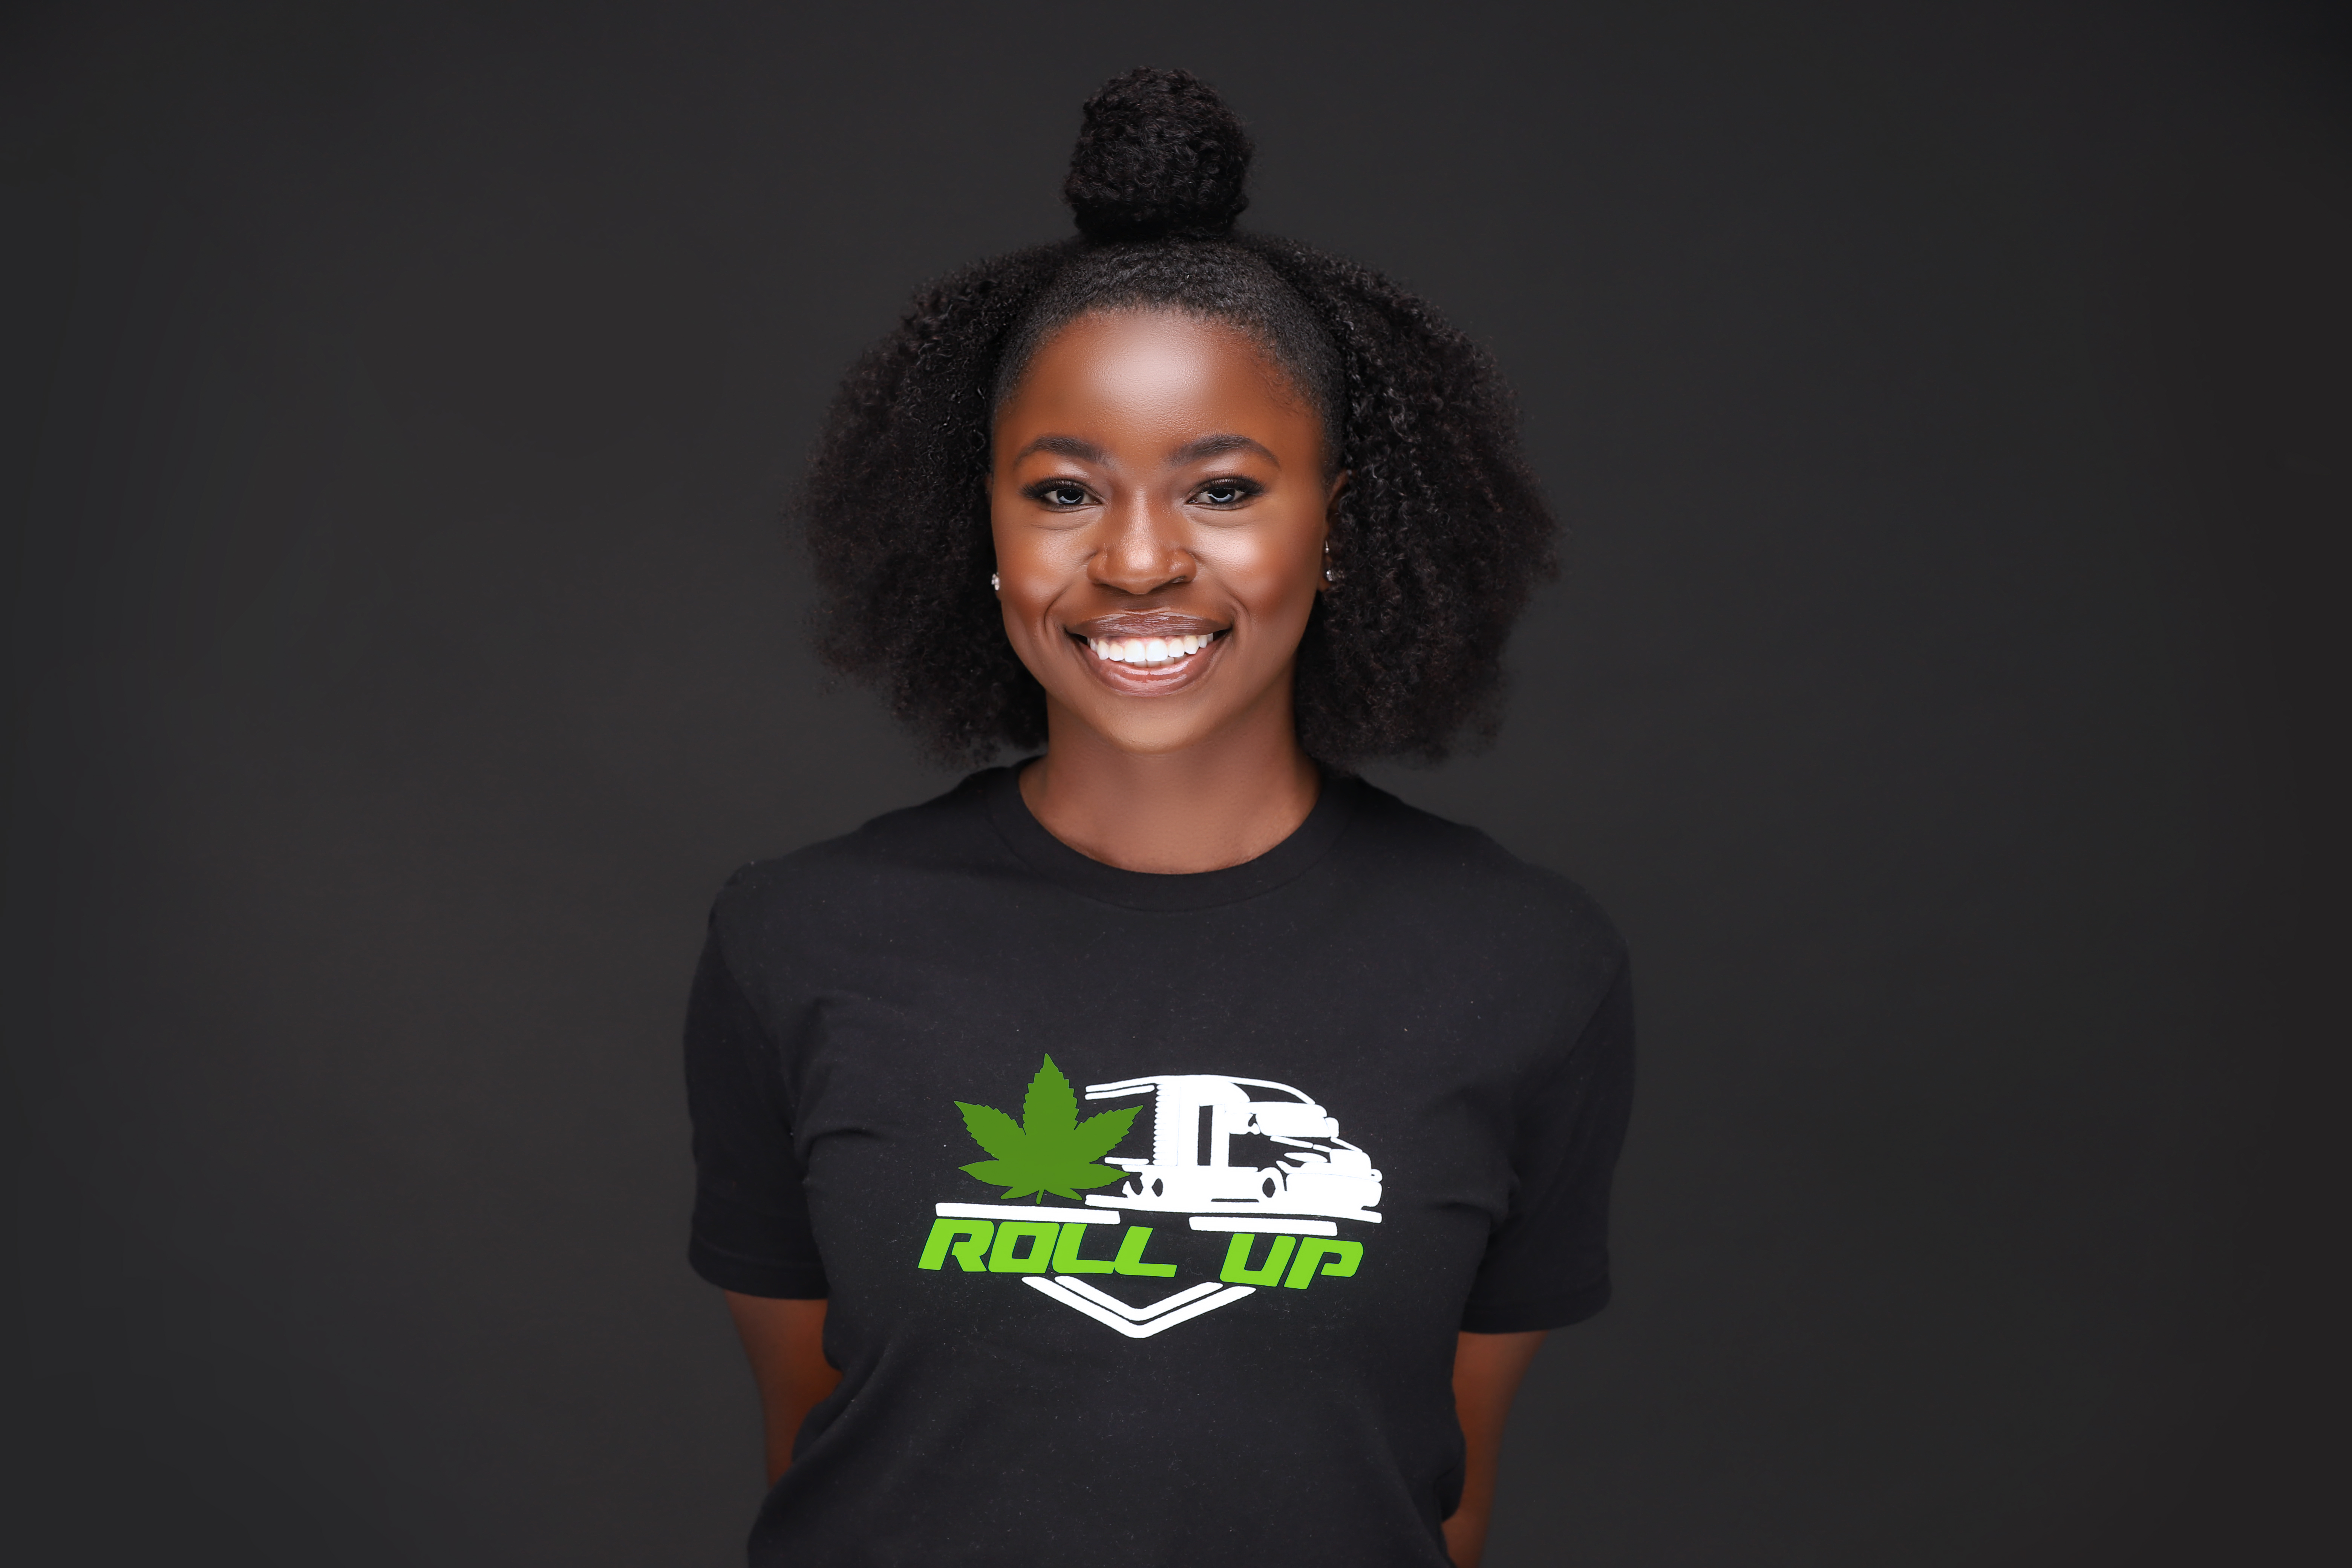 Precious co-founded cannabis delivery service Roll Up Life while attending journalism school